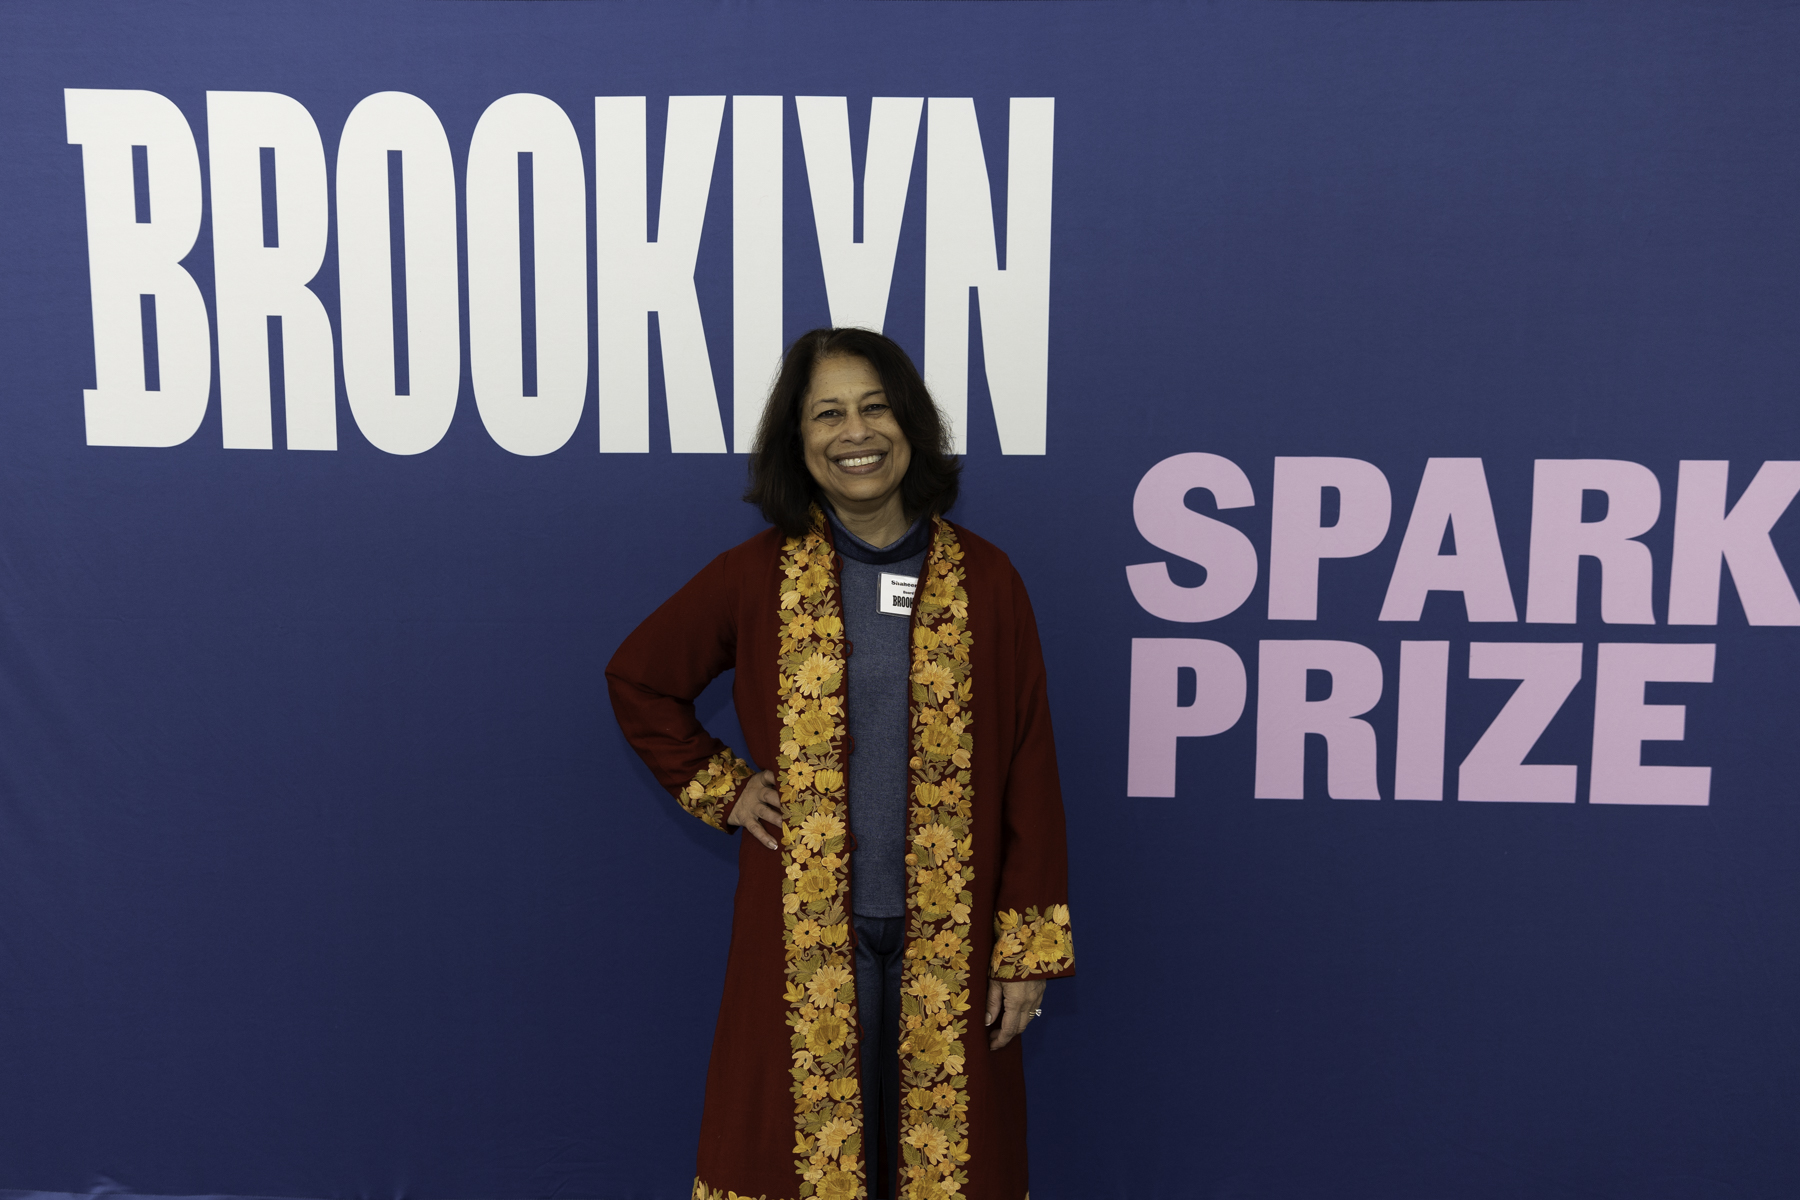 Woman in patterned dress stands smiling before a backdrop with 'brooklyn spark prize' text.